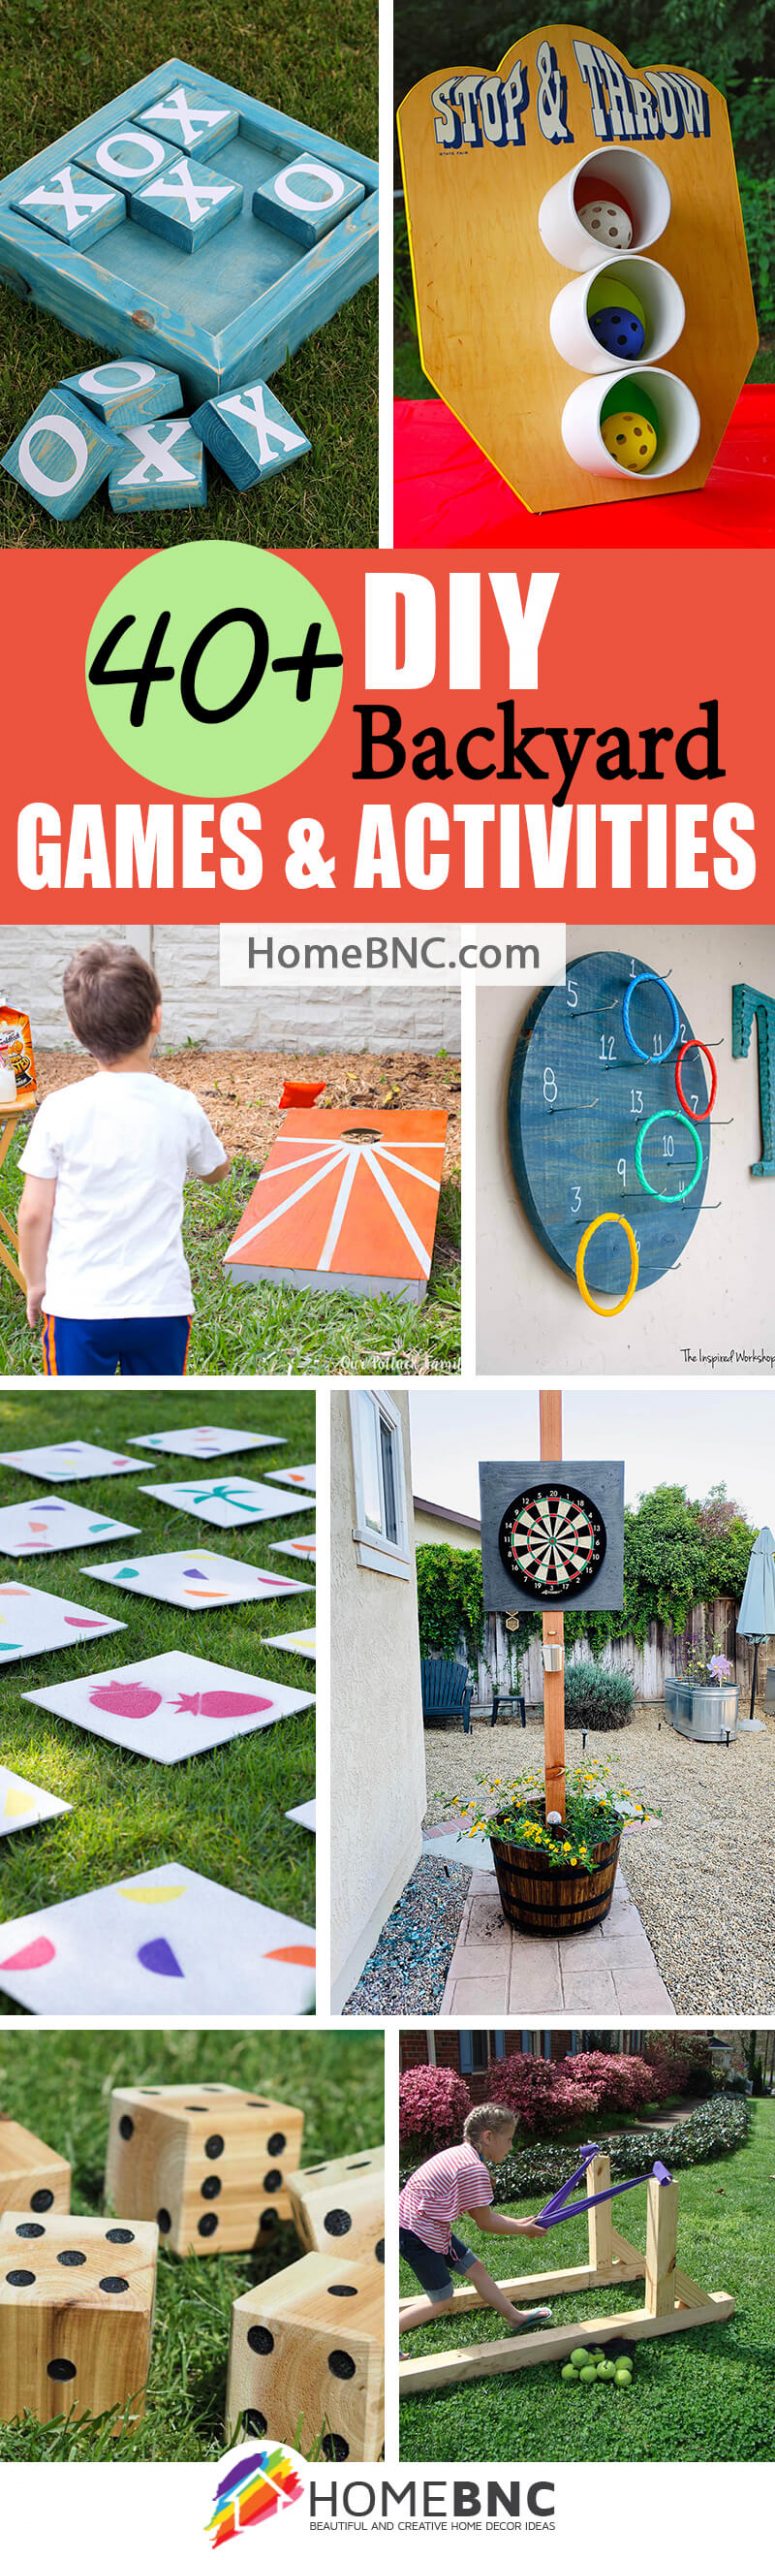 40+ Best DIY Backyard Games Ideas and Designs for 2021